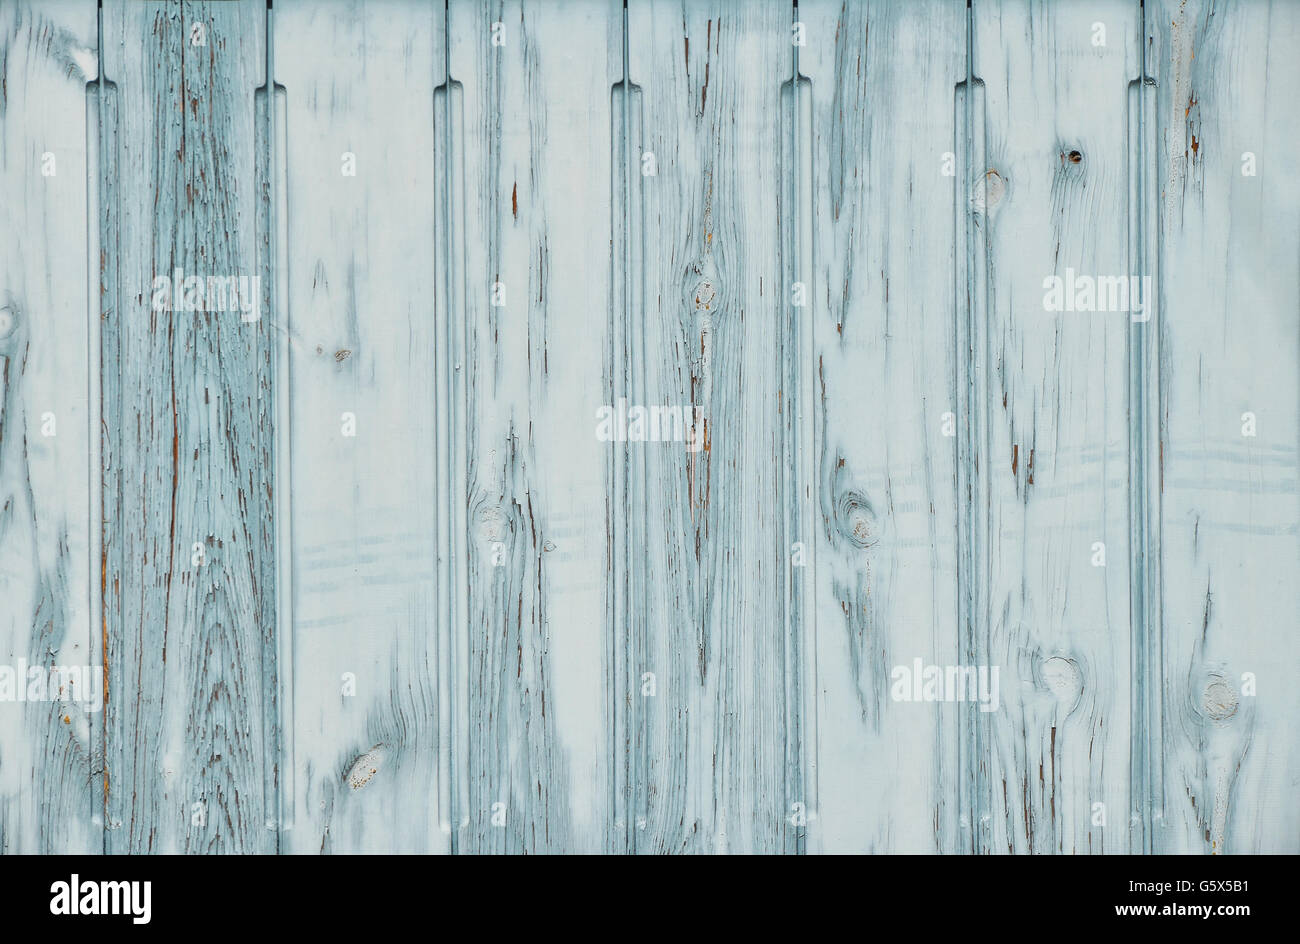 Light blue teal vintage old grunge aged painted wooden panel with vertical planks texture background with paint scaling Stock Photo